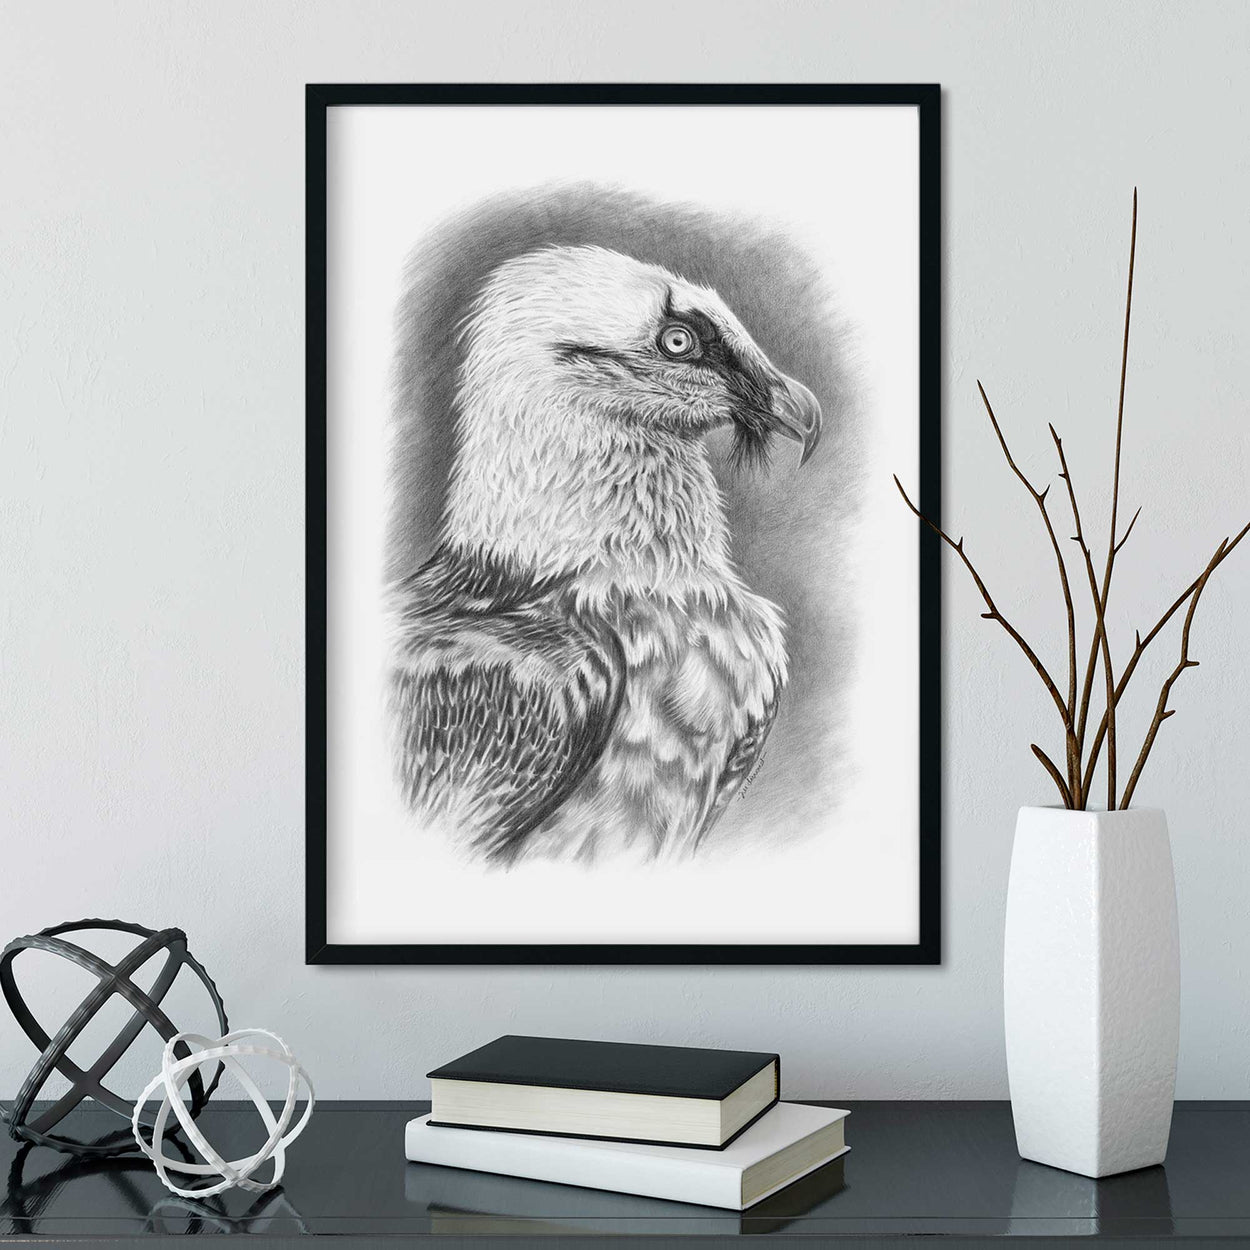 Black frame on wall with black and white picture of vulture bird, desk below with ornaments and books